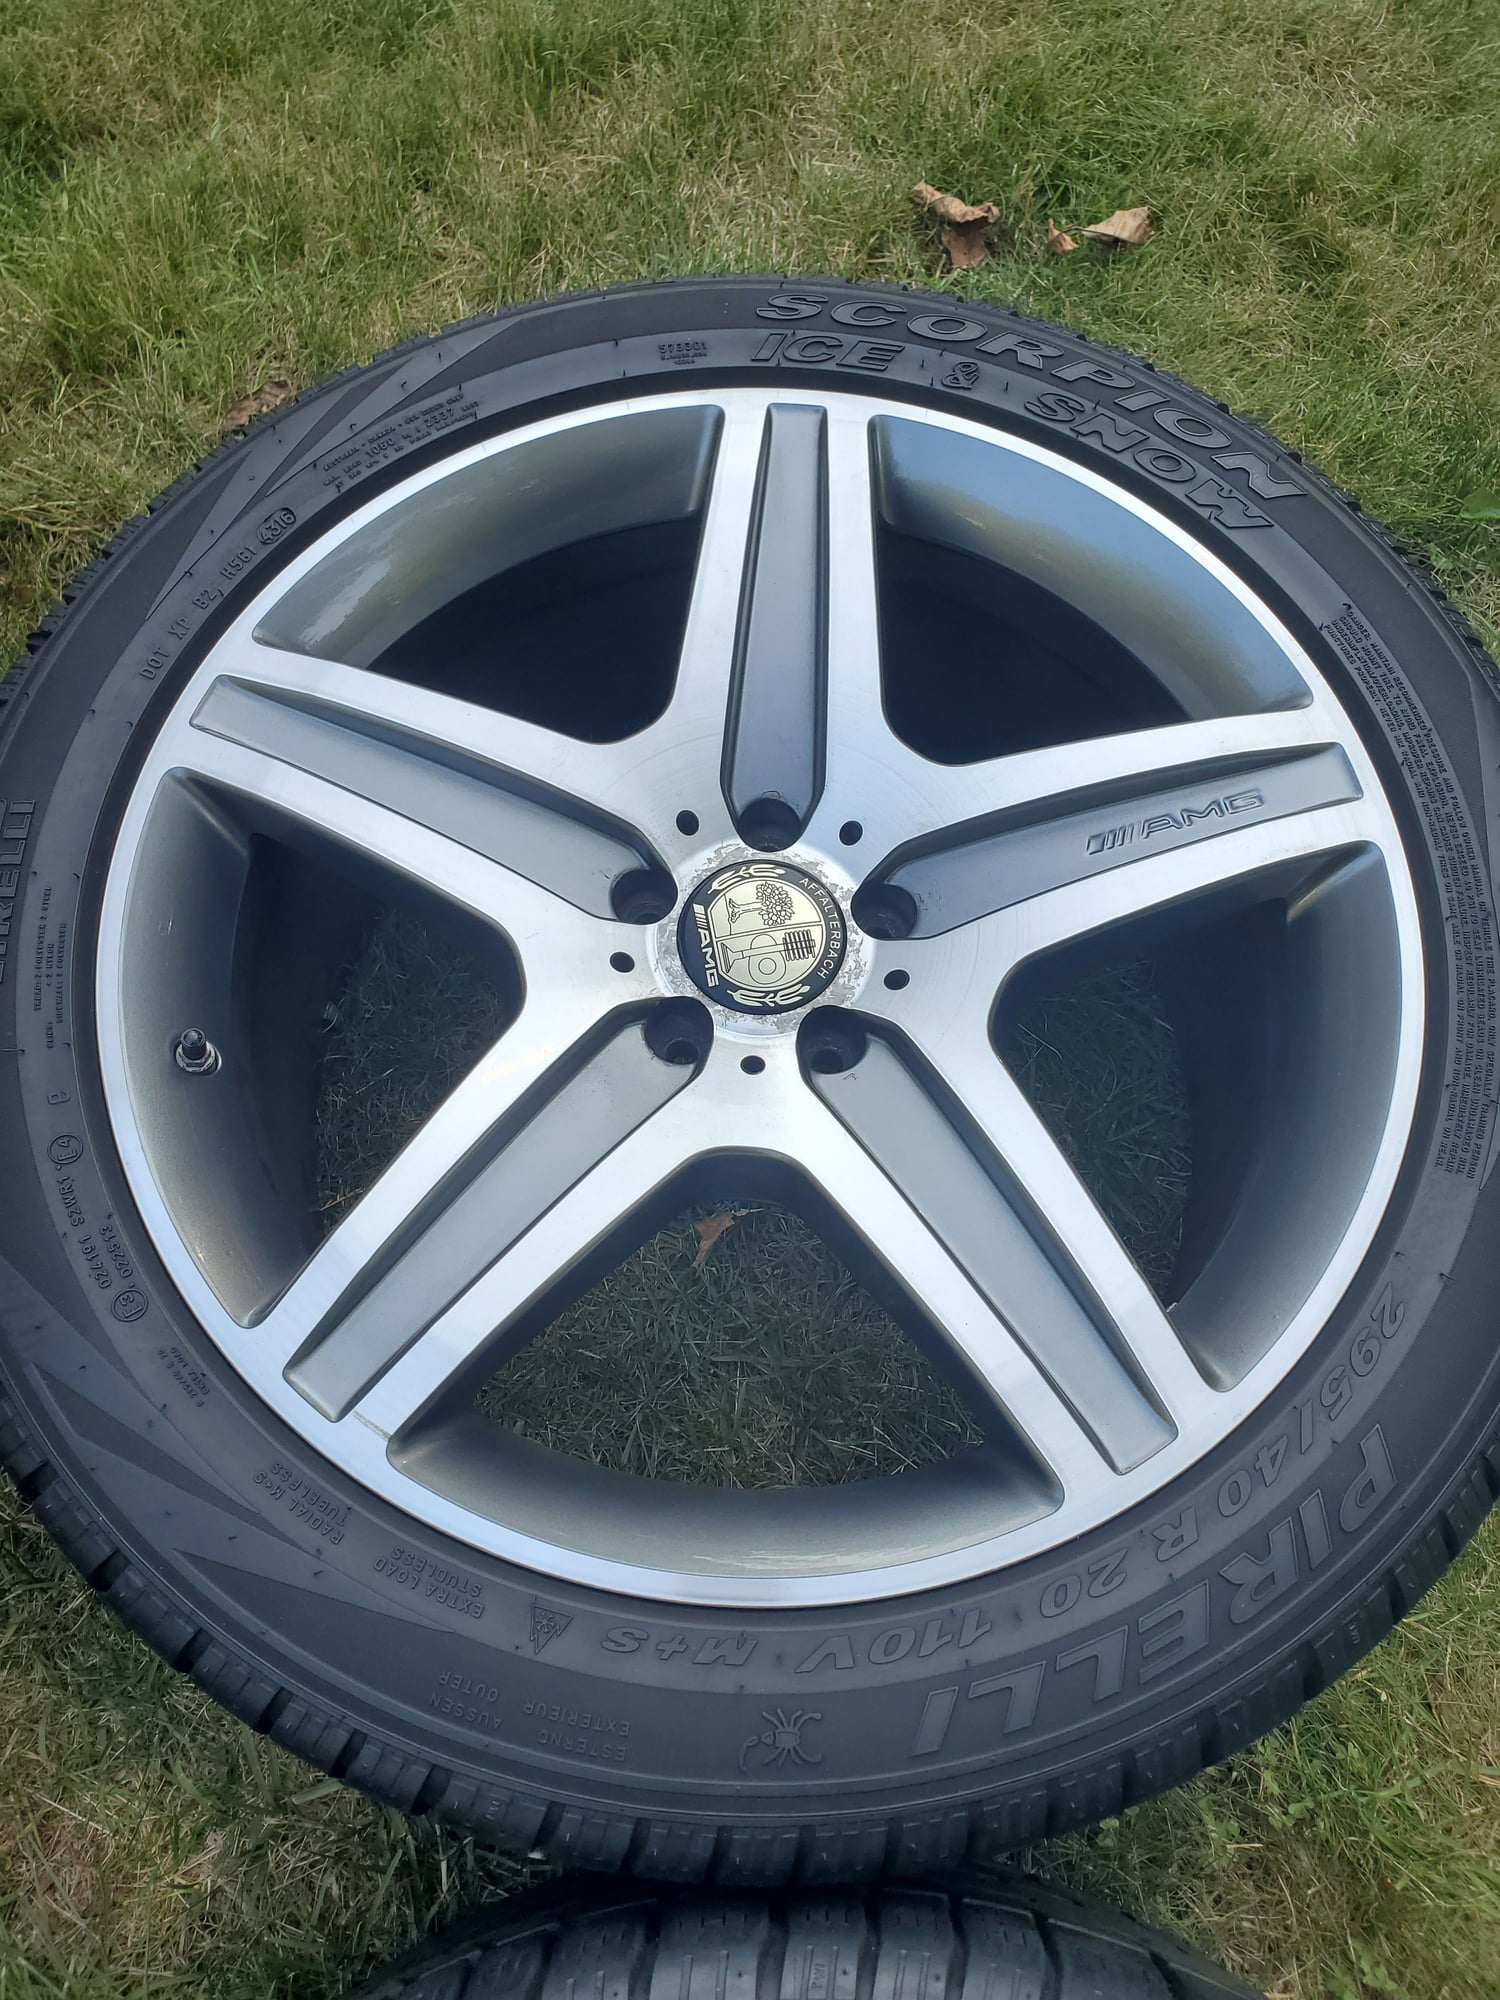 Wheels and Tires/Axles - Rare AMG Wheels for ML63 - Used - 2006 to 2011 Mercedes-Benz ML63 AMG - Fairfield, CT 06890, United States